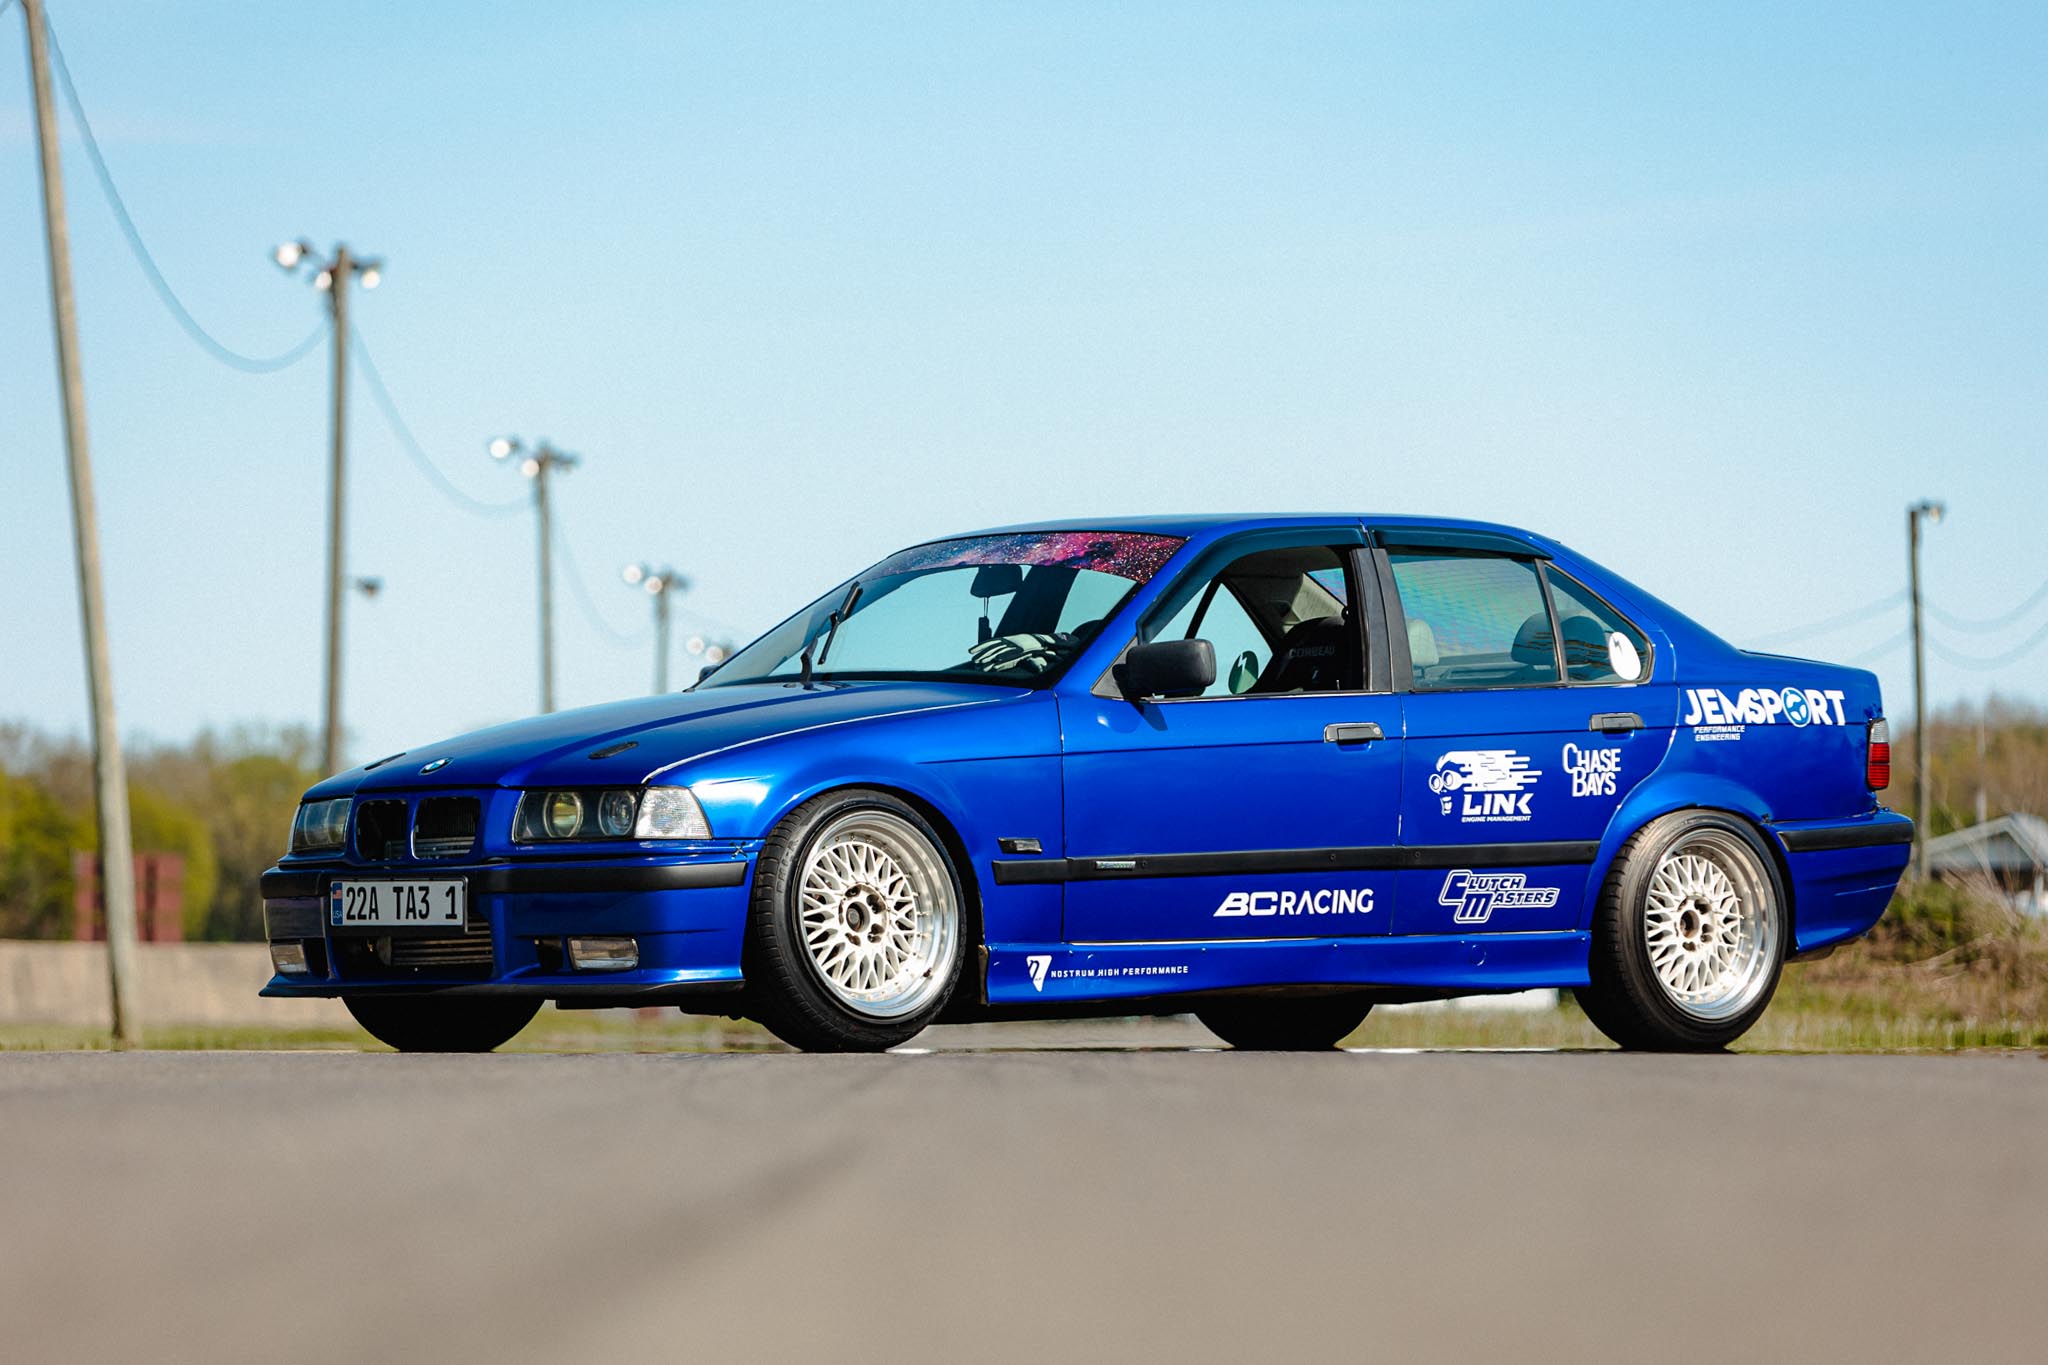 E36 BC Racing coilovers